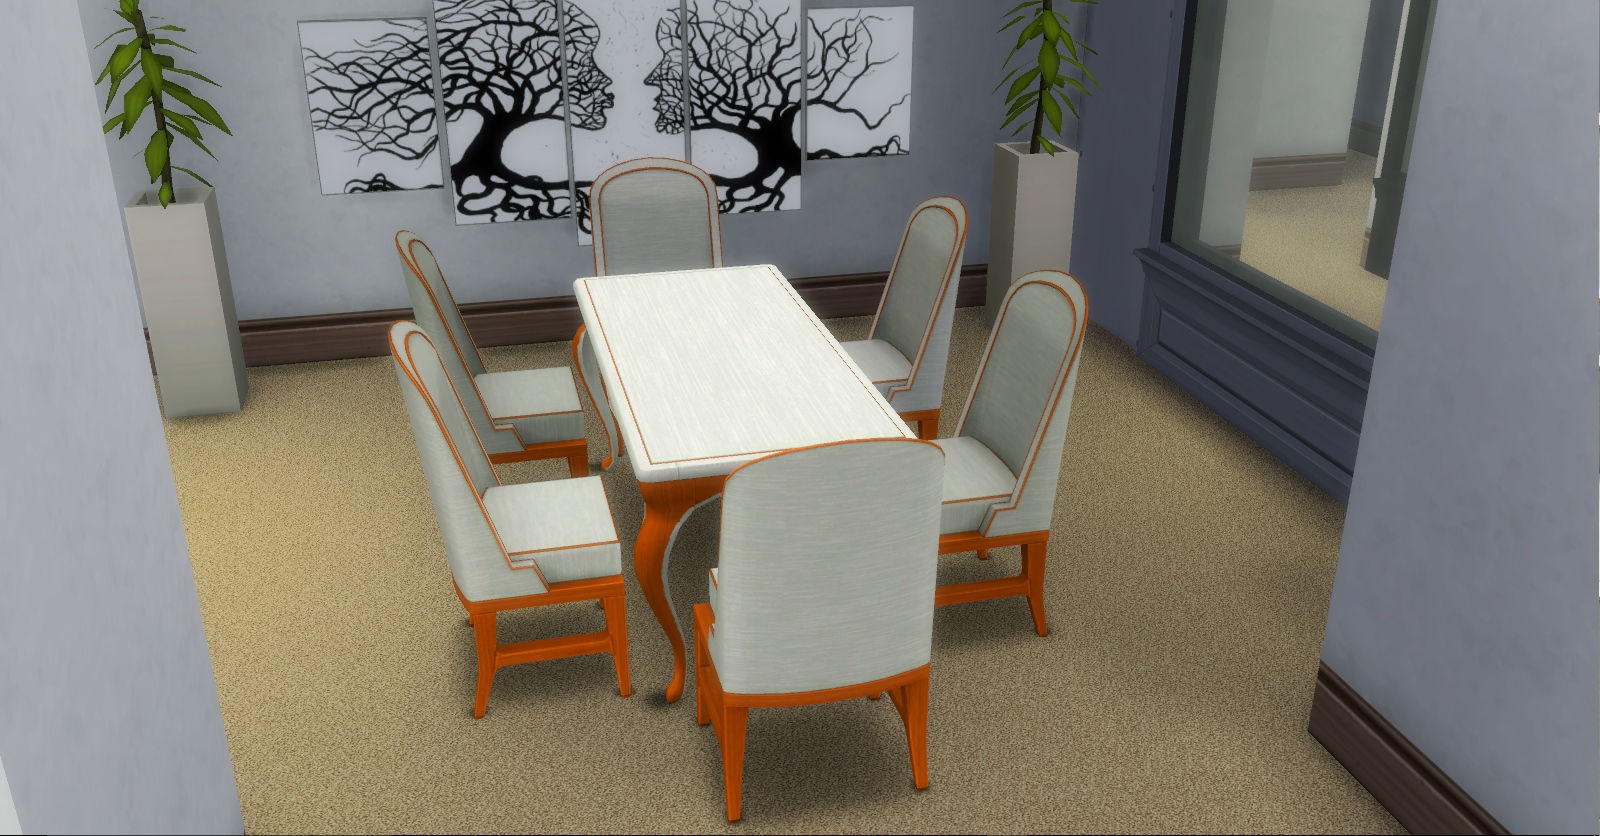 The Sims 3 Perma Dining Room